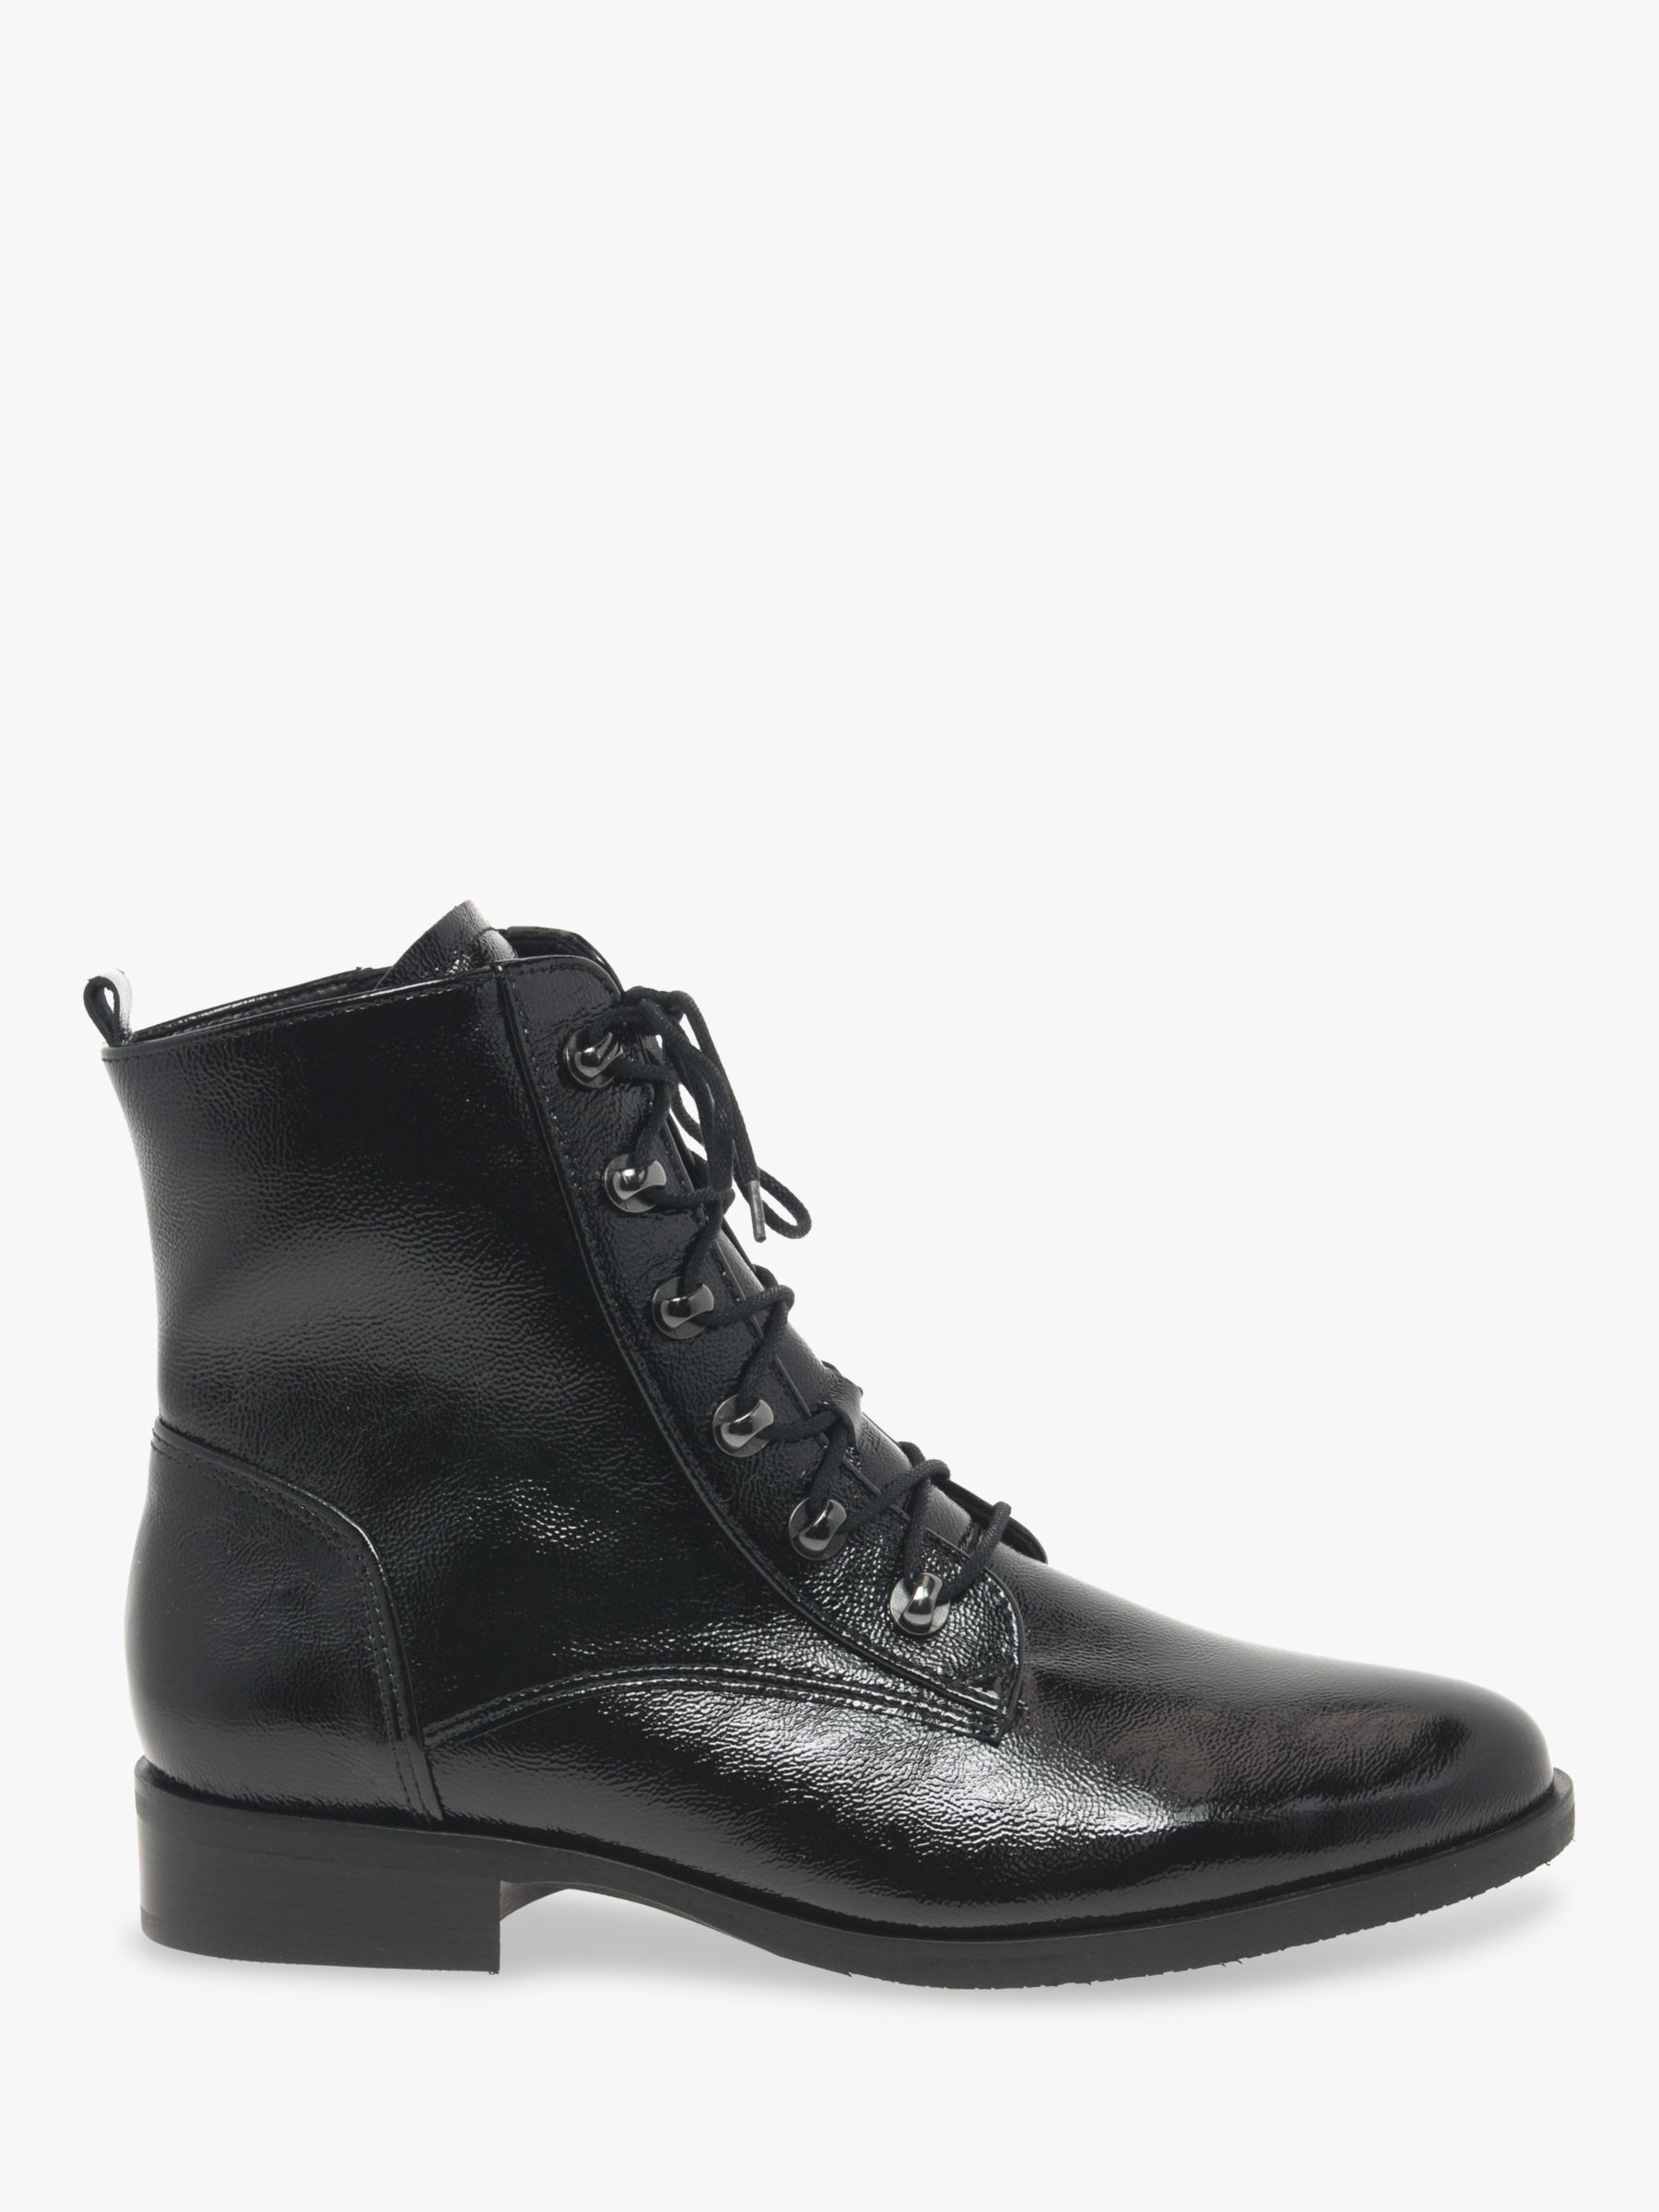 Gabor Keady Wide Fit Lace Up Leather Ankle Boots, Black at John Lewis ...